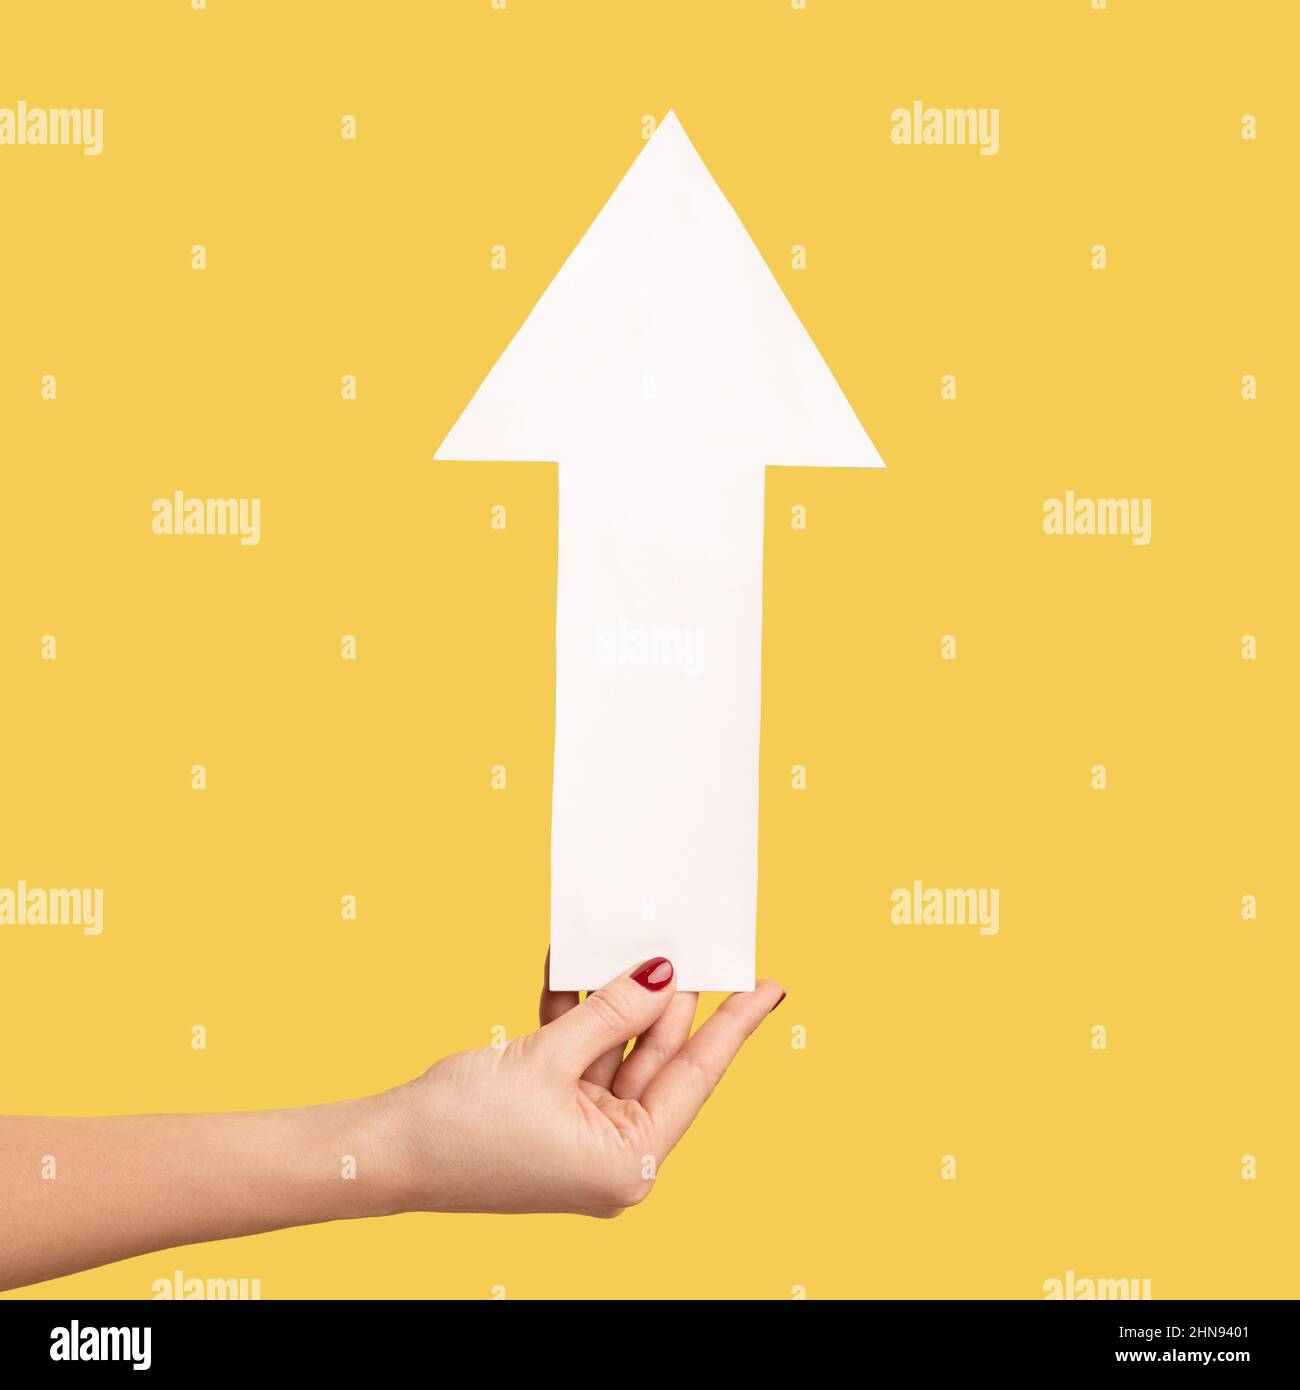 Closeup profile side view of woman hand holding arrow pointing up, growth and increase concept. Indoor studio shot isolated on yellow background. Stock Photo